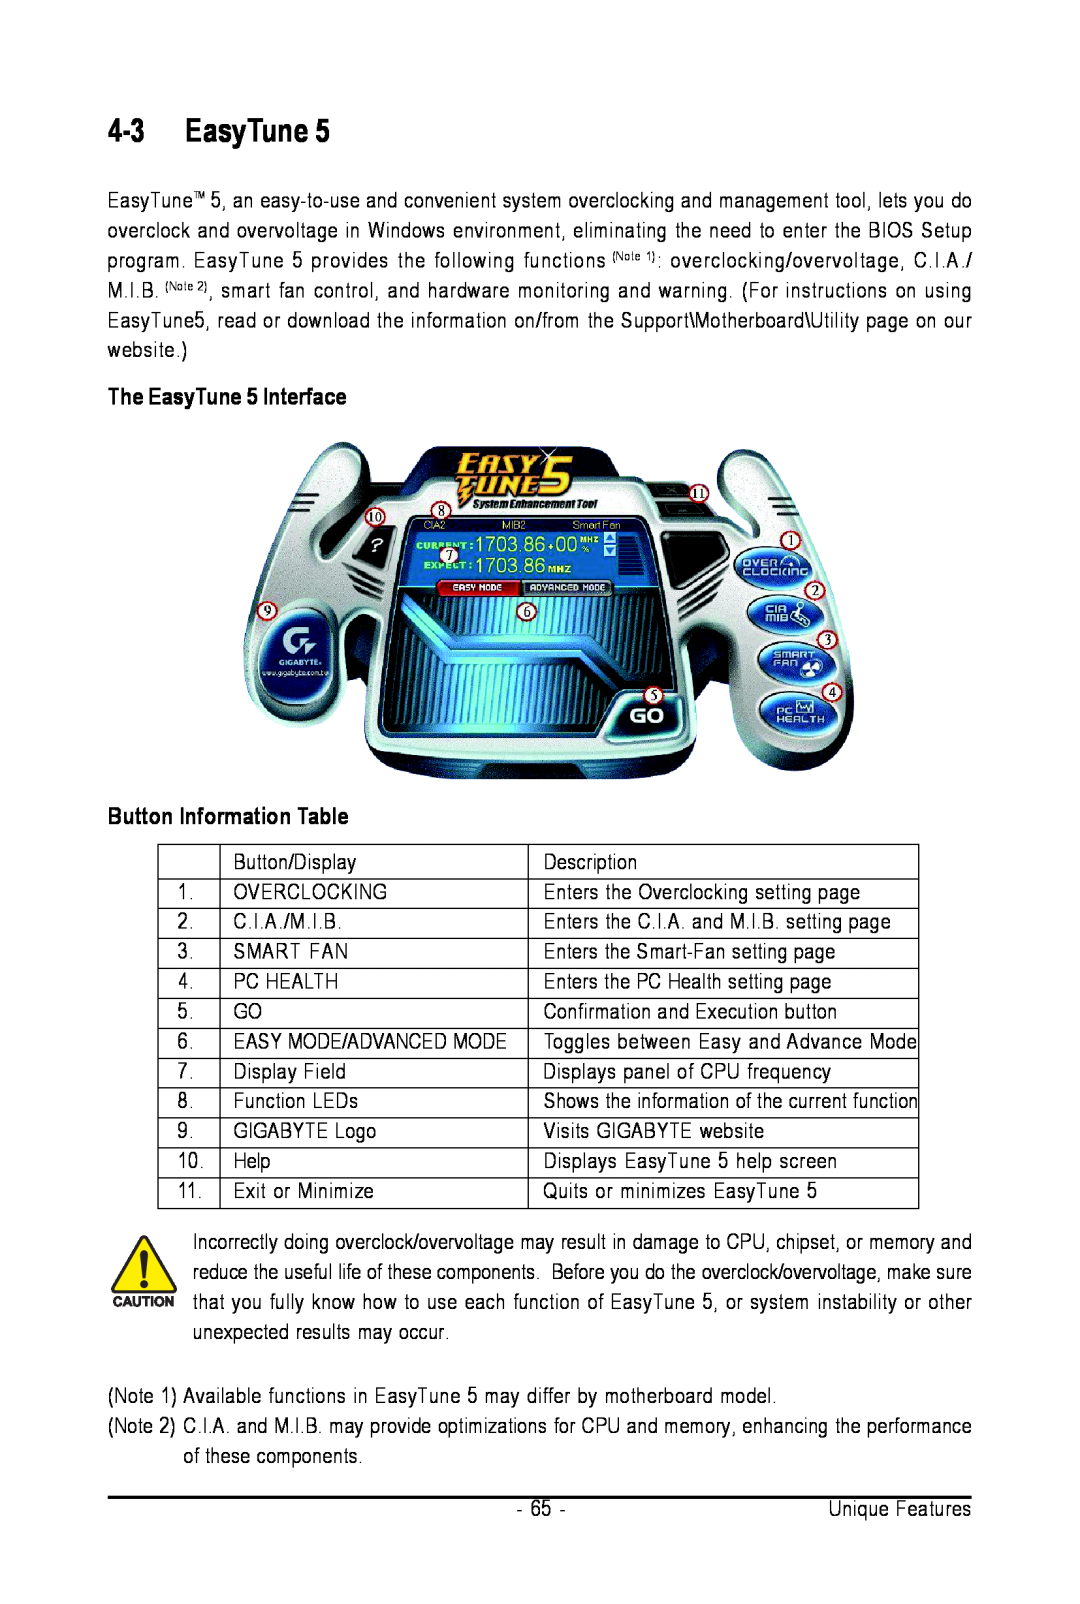 Intel GA-945PL-S3G user manual 4-3EasyTune, The EasyTune 5 Interface Button Information Table 